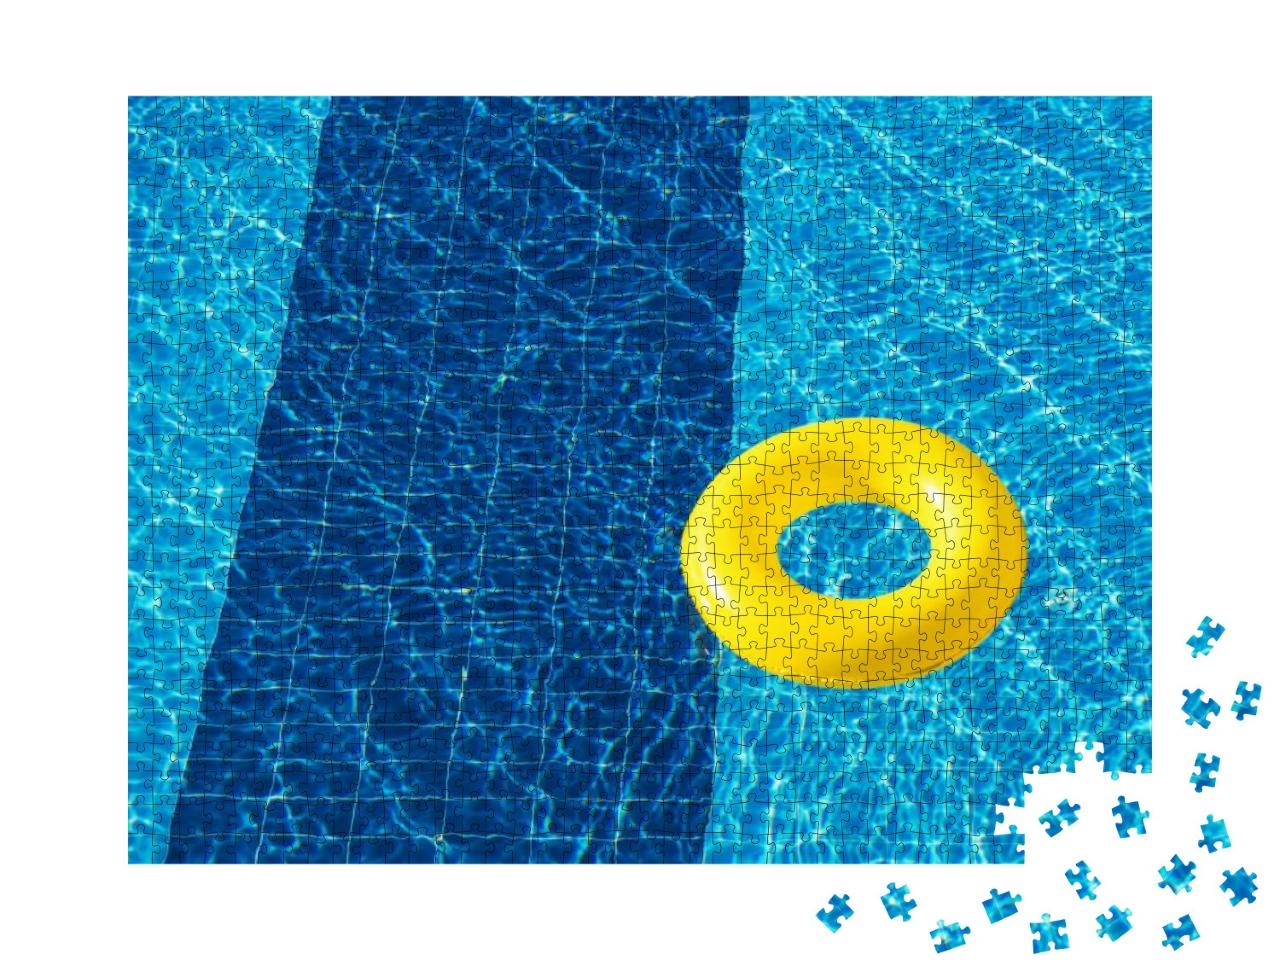 Yellow Pool Float, Ring Floating in a Refreshing Blue Swi... Jigsaw Puzzle with 1000 pieces